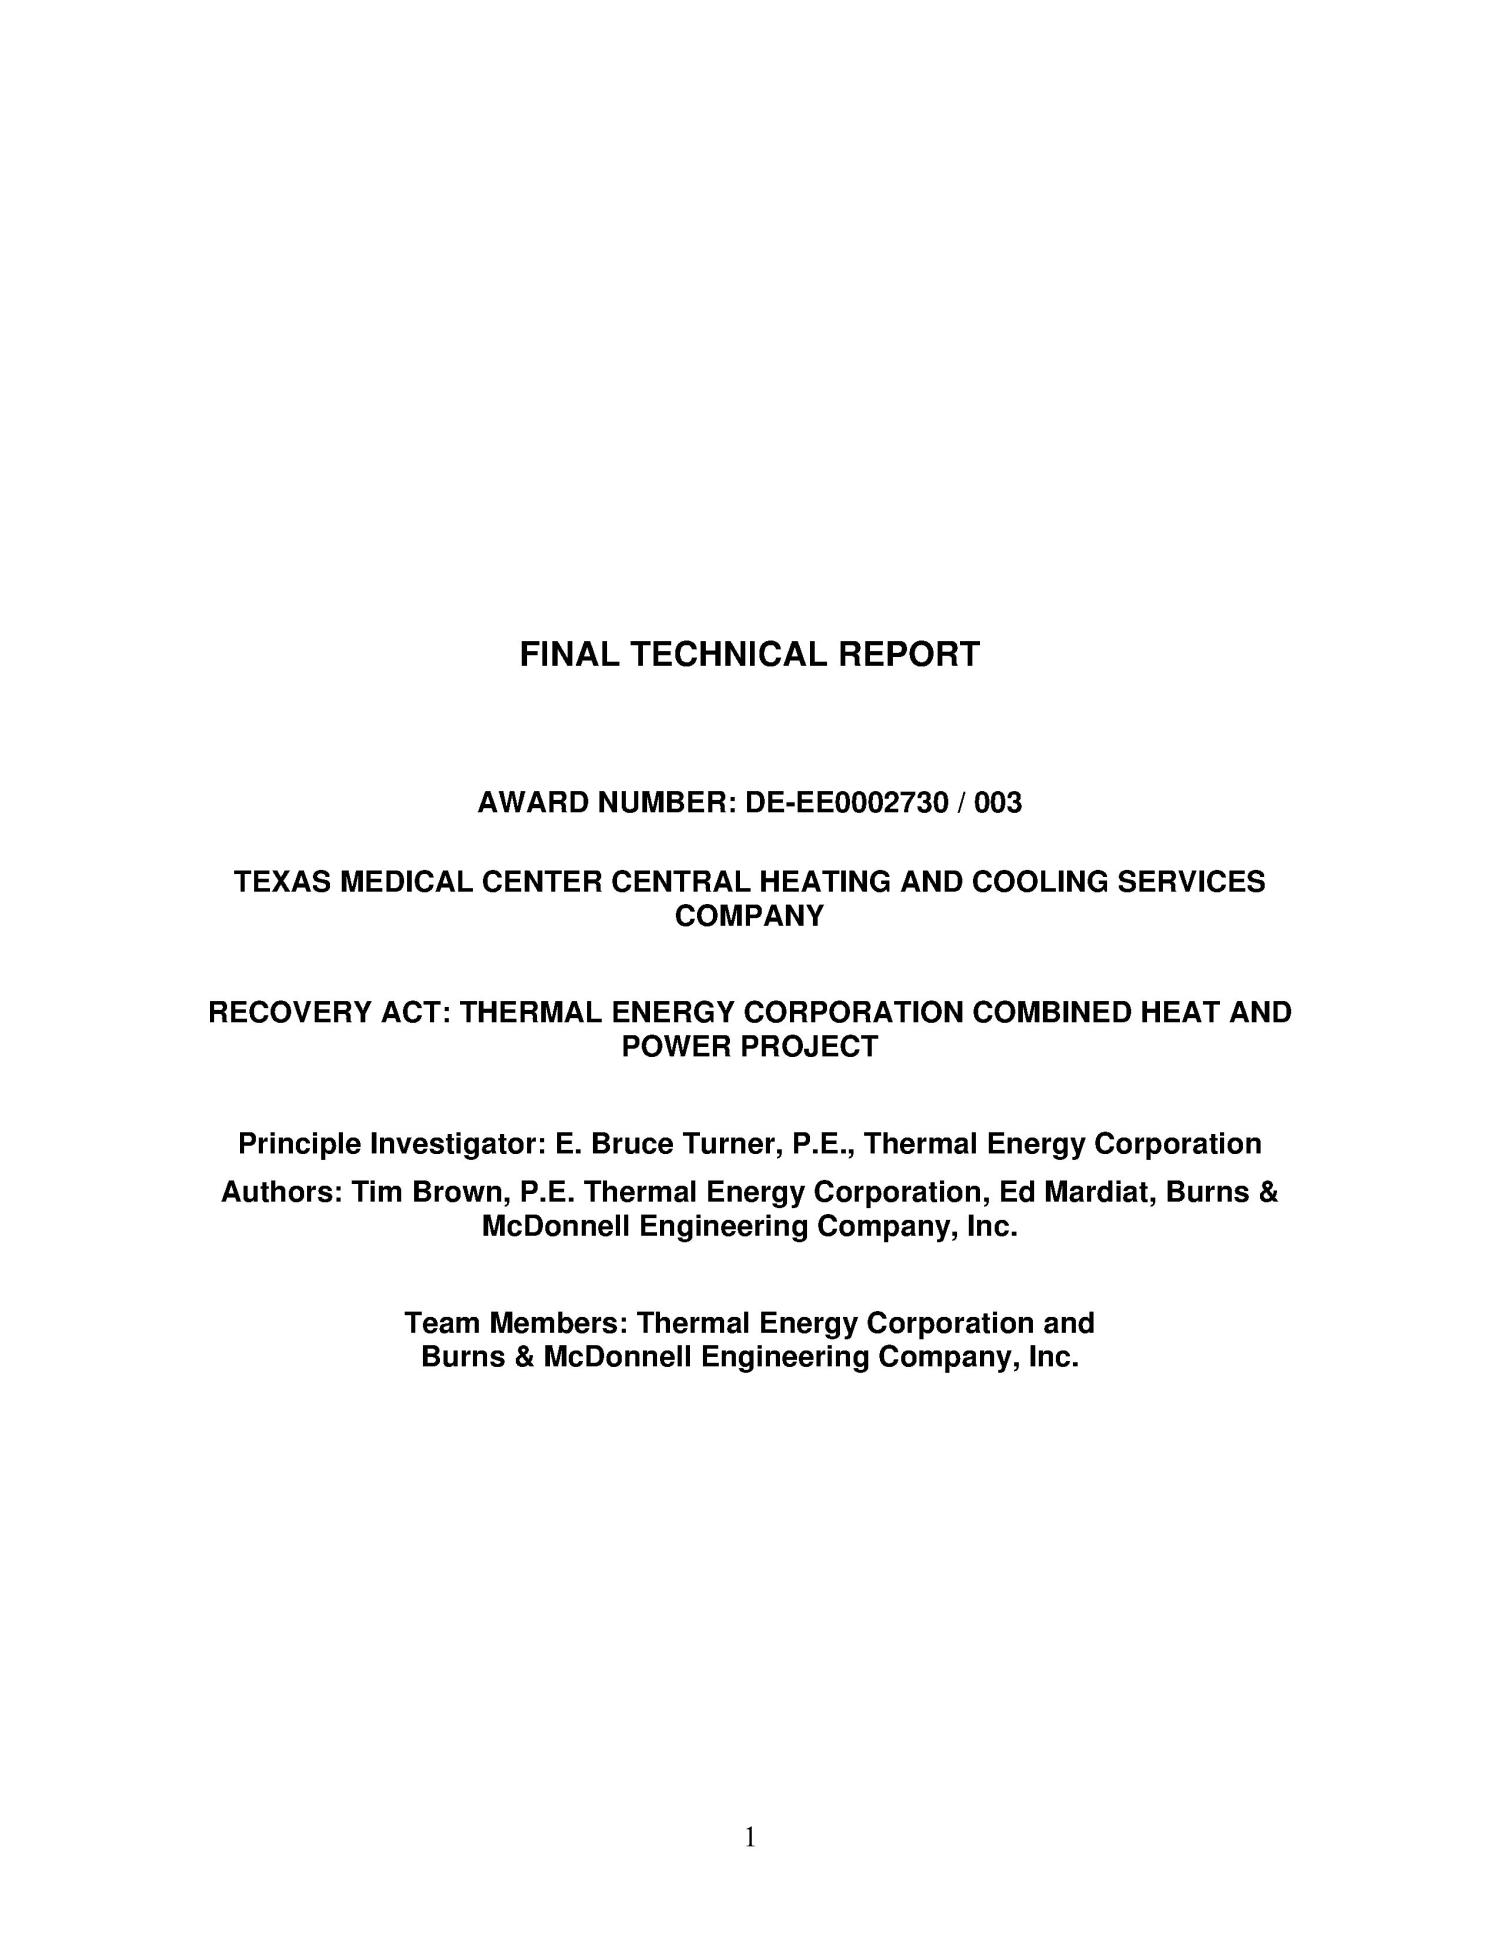 Thermal Energy Corporation Combined Heat and Power Project
                                                
                                                    [Sequence #]: 1 of 28
                                                